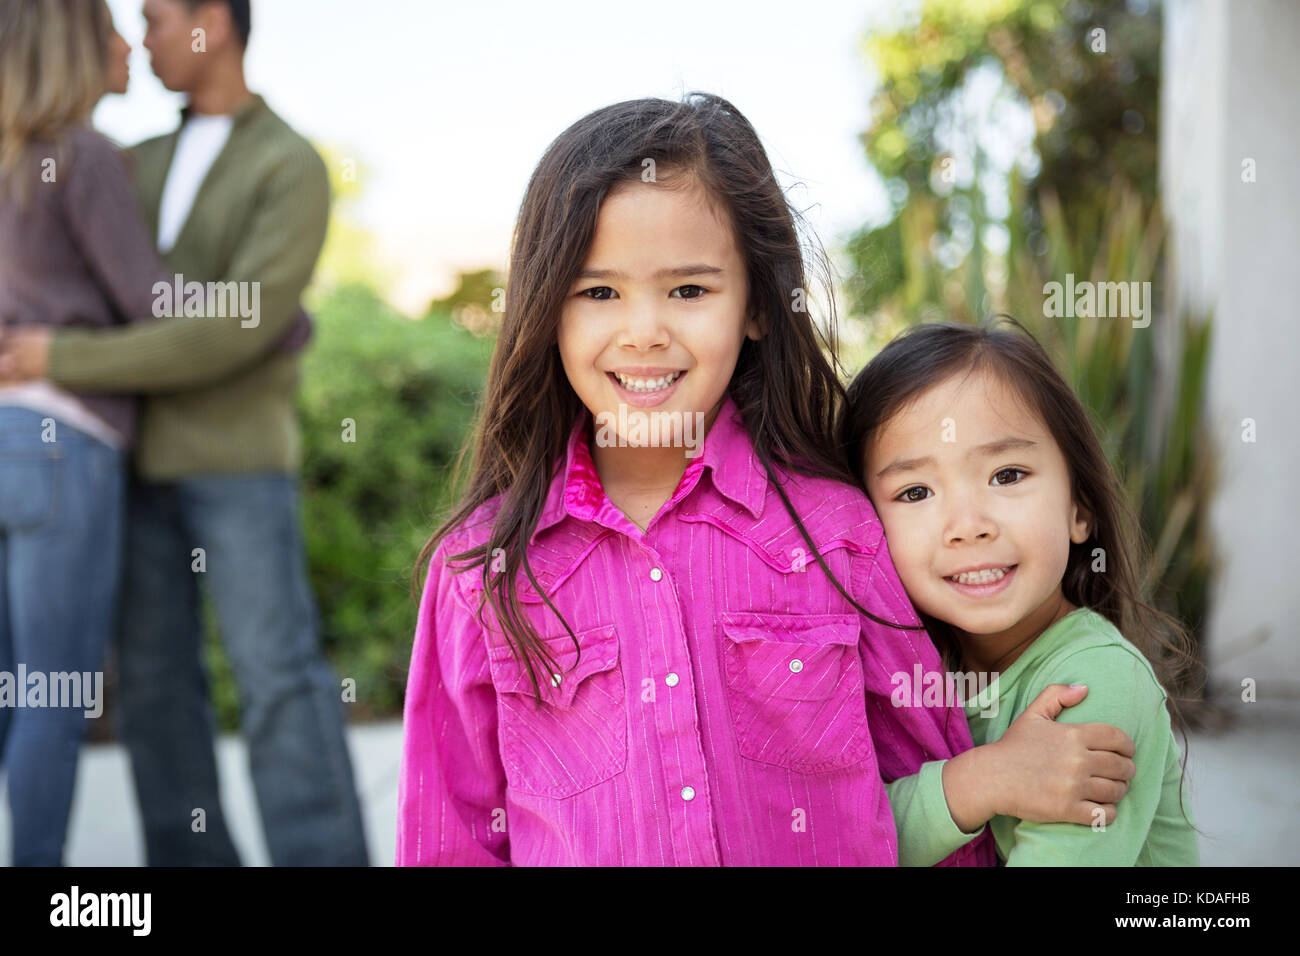 Happy little girls with their parents in the background. Stock Photo